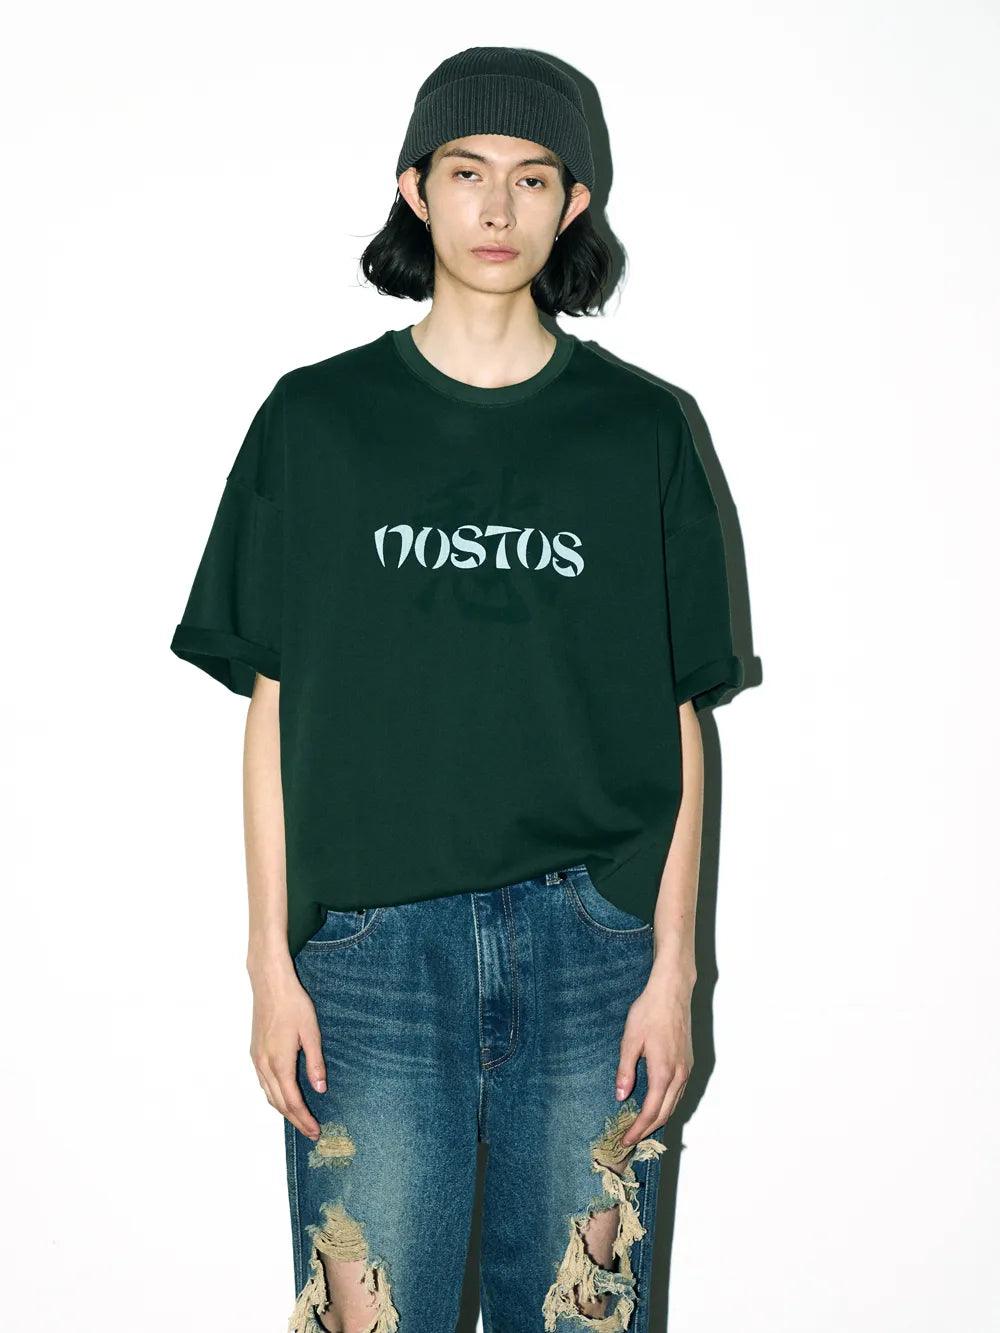 Partimento Nostos Double Layered T-shirt - Green - T-Shirts